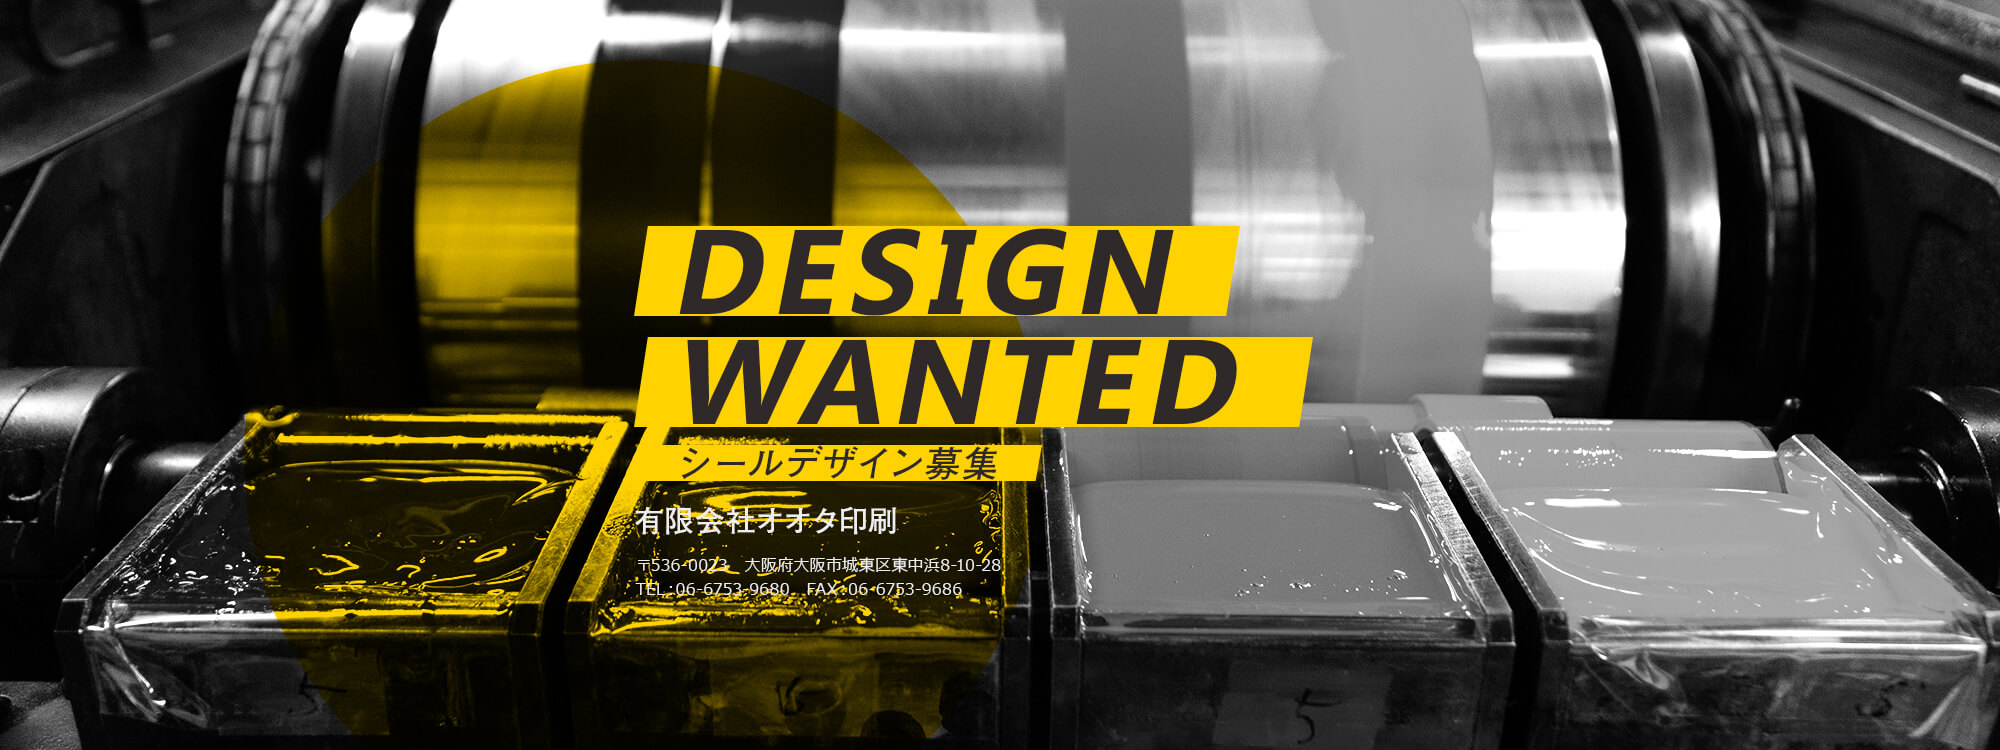 Design wanted